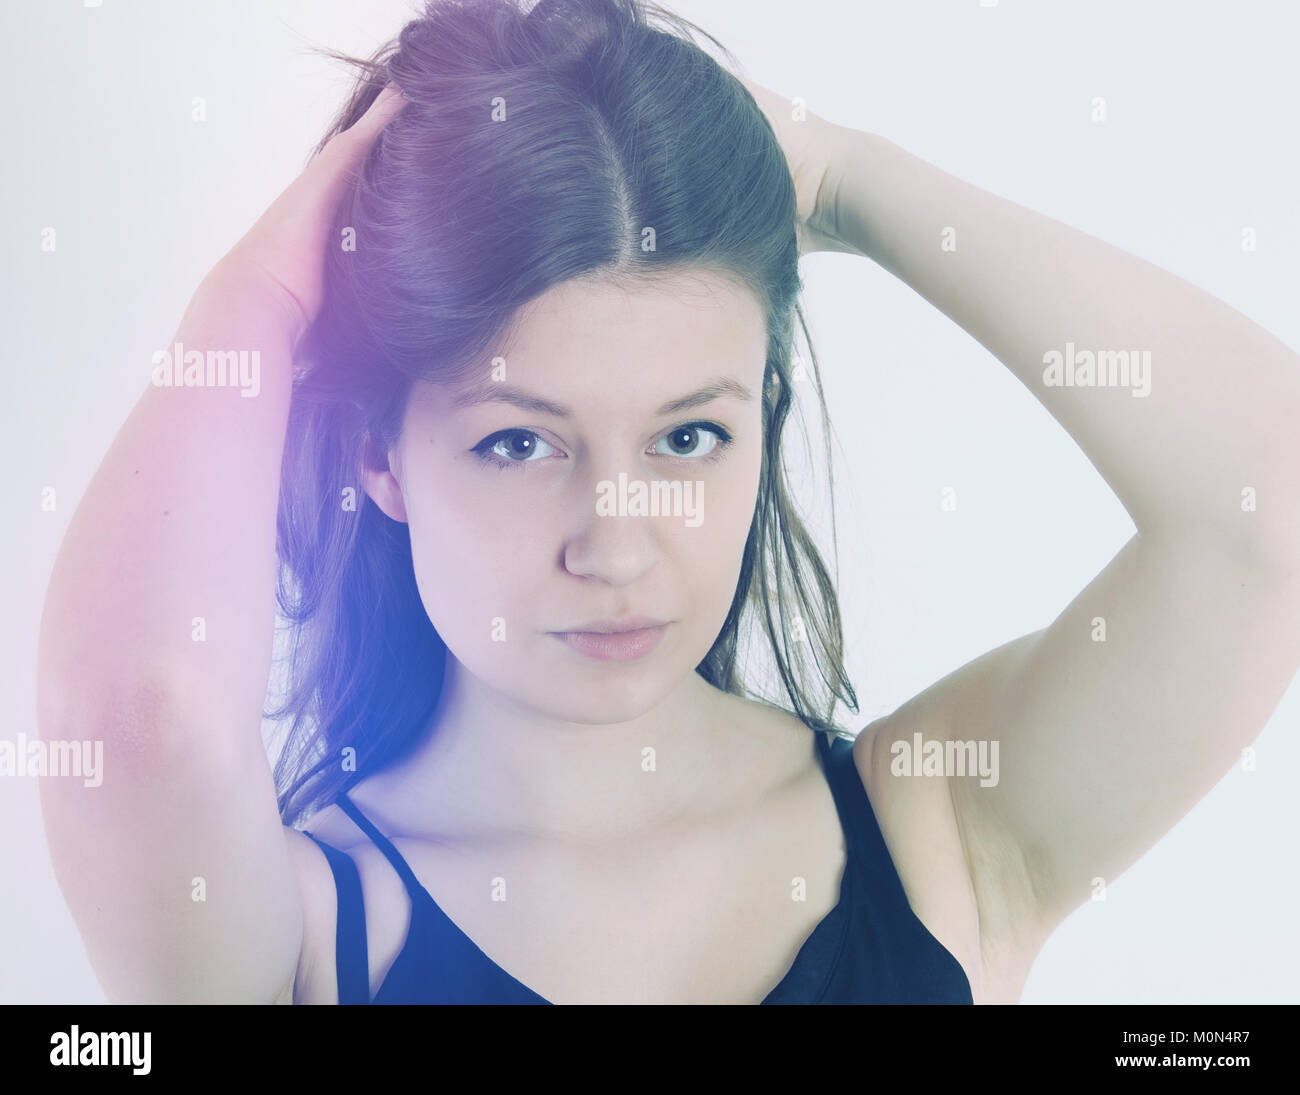 portrait of a beautiful young woman Stock Photo